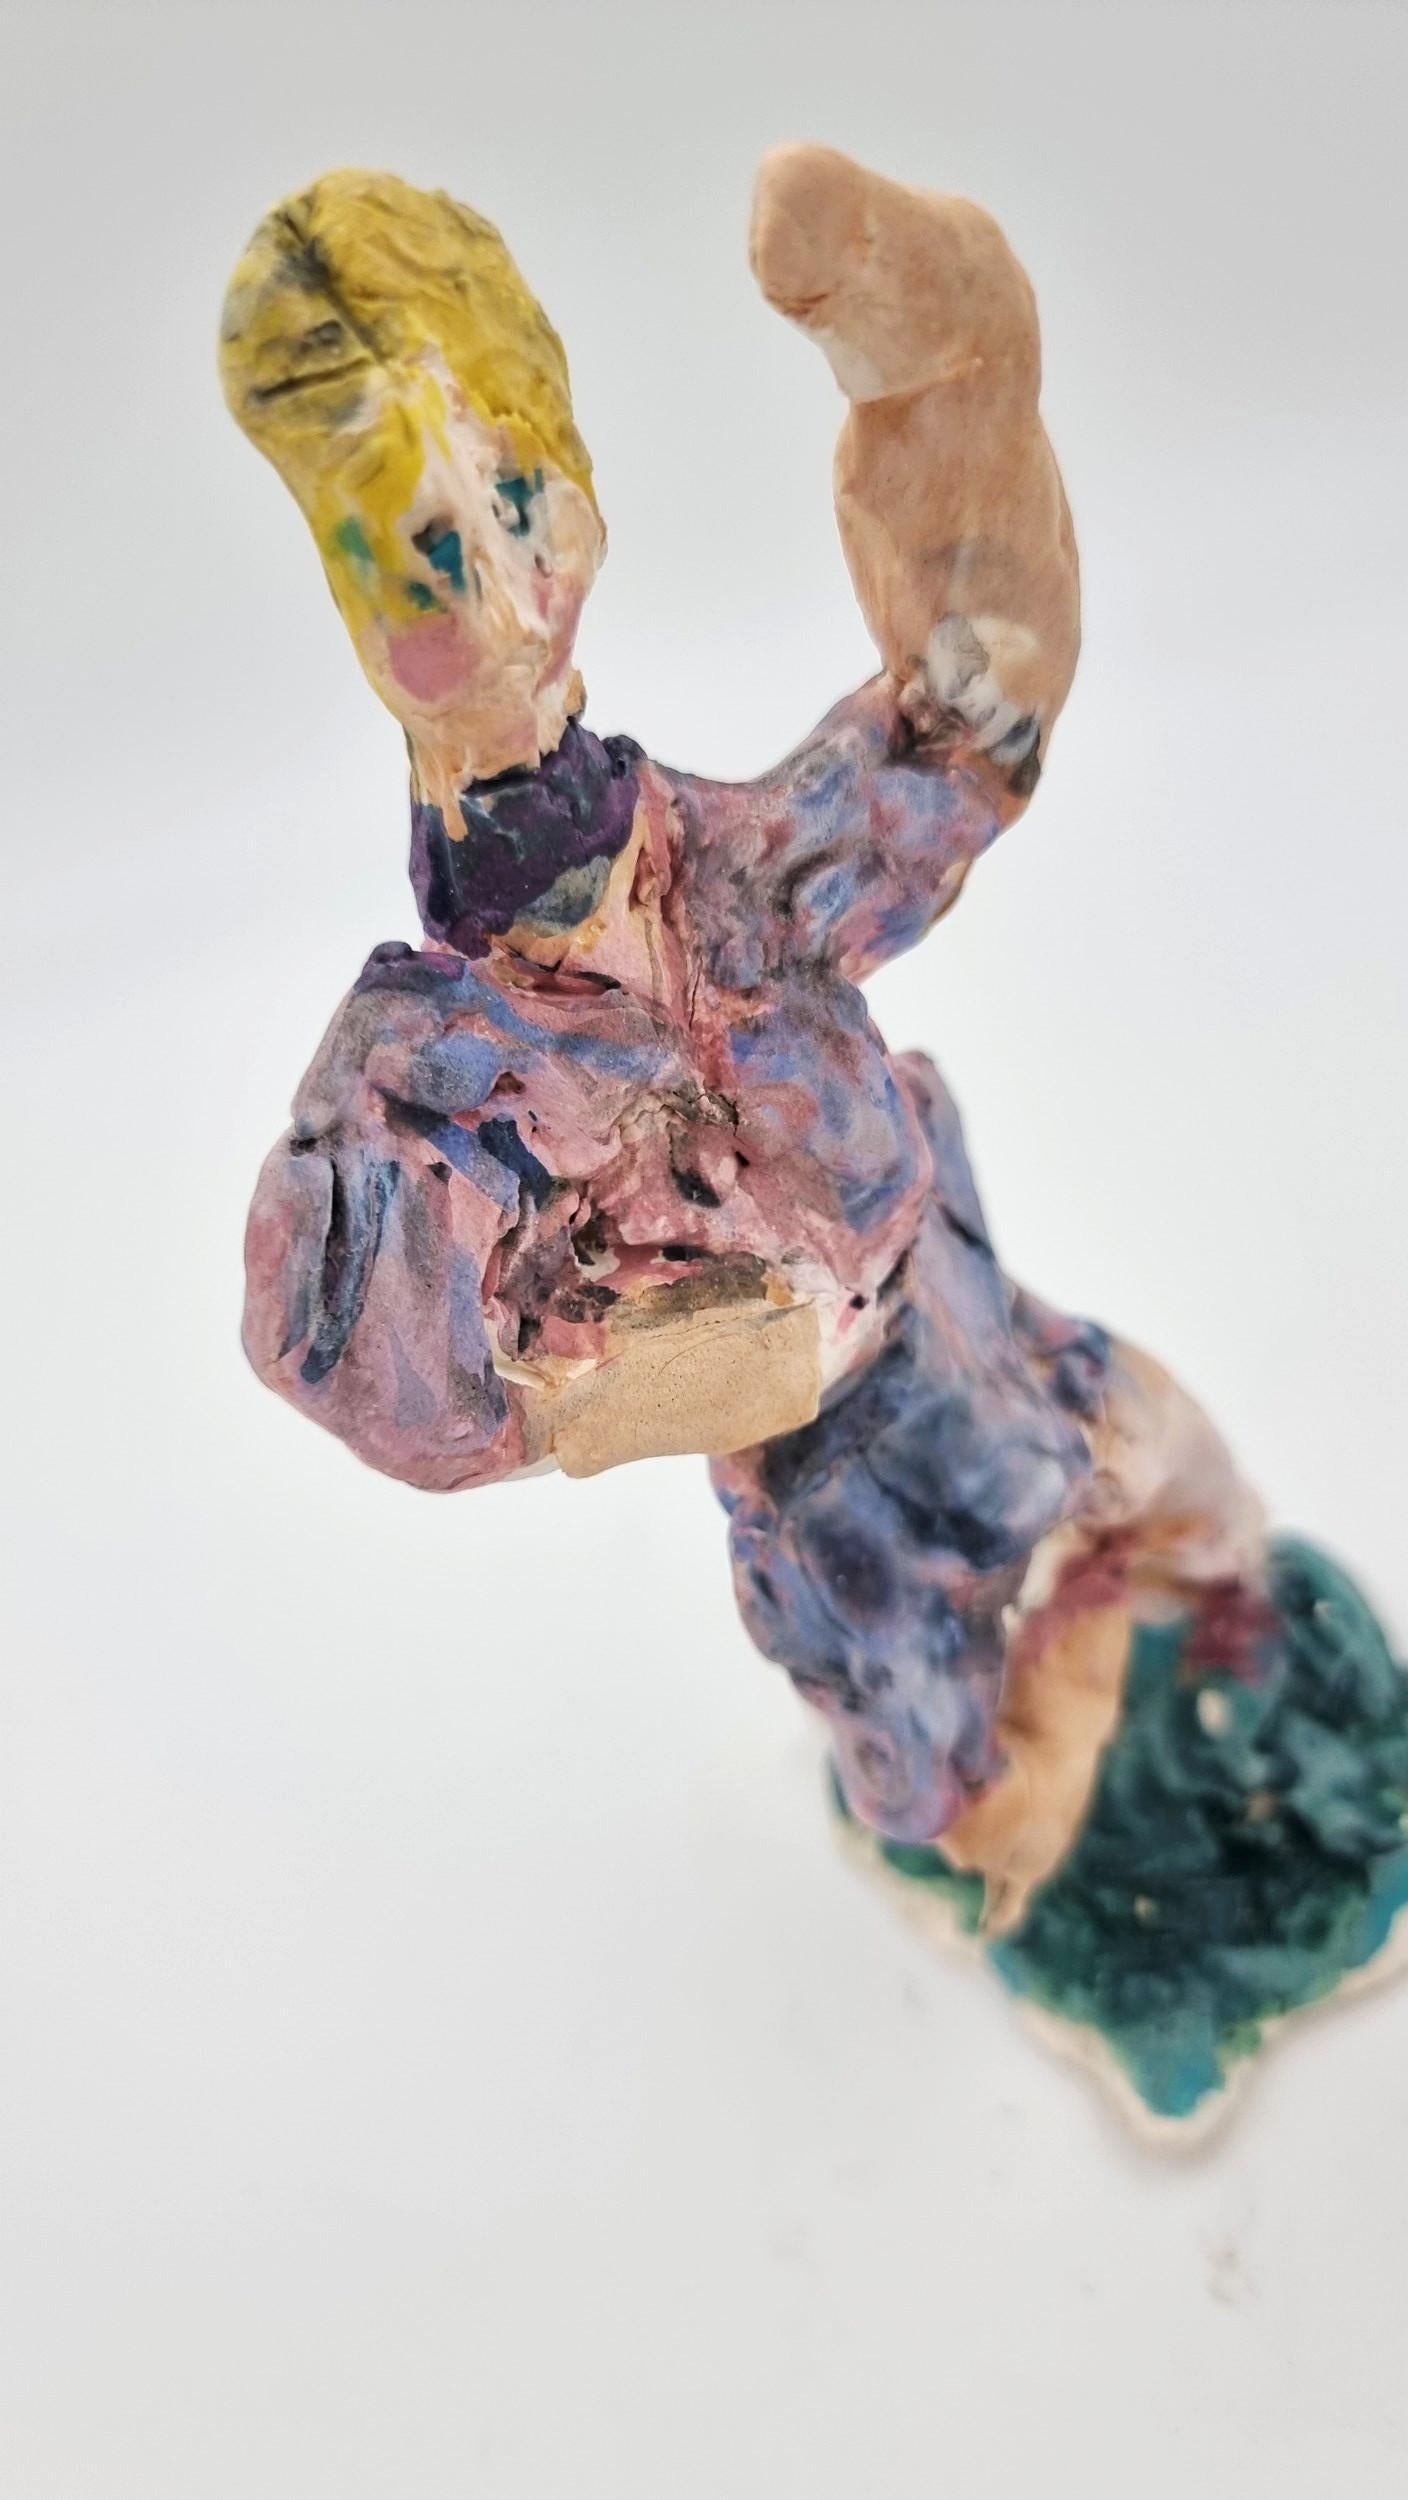 Ann Rothman
Purple Ballarina (Circus, Whimsical, Viola Frey, Delicate, Playful, Fun, Cirque du Soleil, The Ringling Bros., Barnum & Bailey)
2022
Porcelain, Low Fire Glazes, Crayons, Watercolors
Fired Cone 06, 04
6 x 3.5 x 3 inches
COA provided
Ref.: